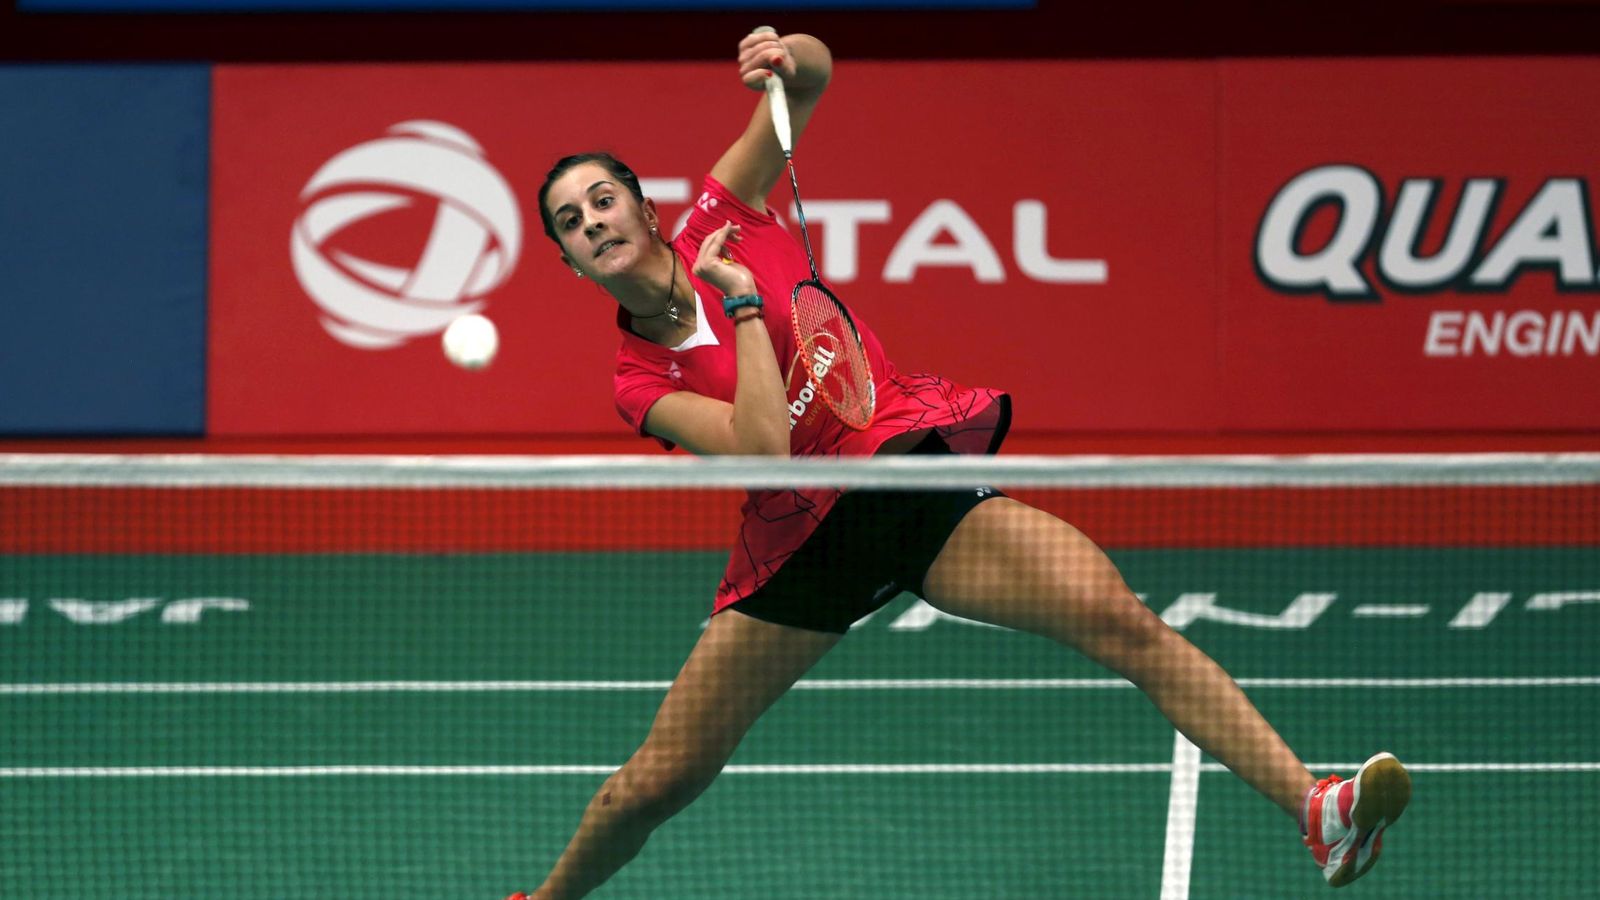 Foto: Spain's marin returns a shot during her single match against malaysia's tee at the bwf world championship in jakarta